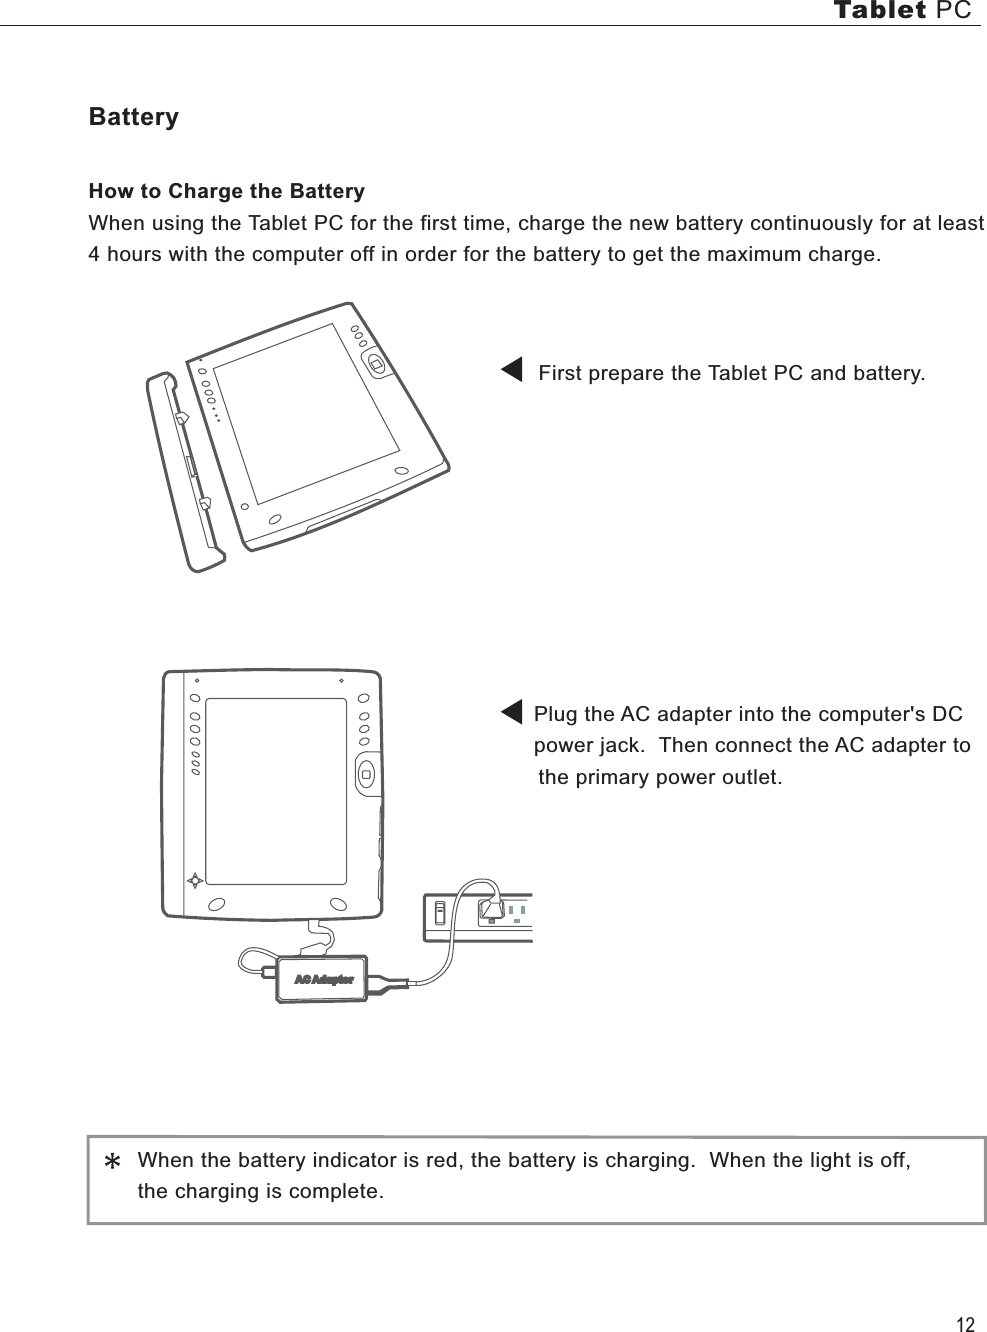 12Tablet PCBatteryHow to Charge the BatteryWhen using the Tablet PC for the first time, charge the new battery continuously for at least  4 hours with the computer off in order for the battery to get the maximum charge.            First prepare the Tablet PC and battery.                 Plug the AC adapter into the computer&apos;s DC      power jack.  Then connect the AC adapter to       the primary power outlet.                                                                       When the battery indicator is red, the battery is charging.  When the light is off,    the charging is complete.AC Adaptor